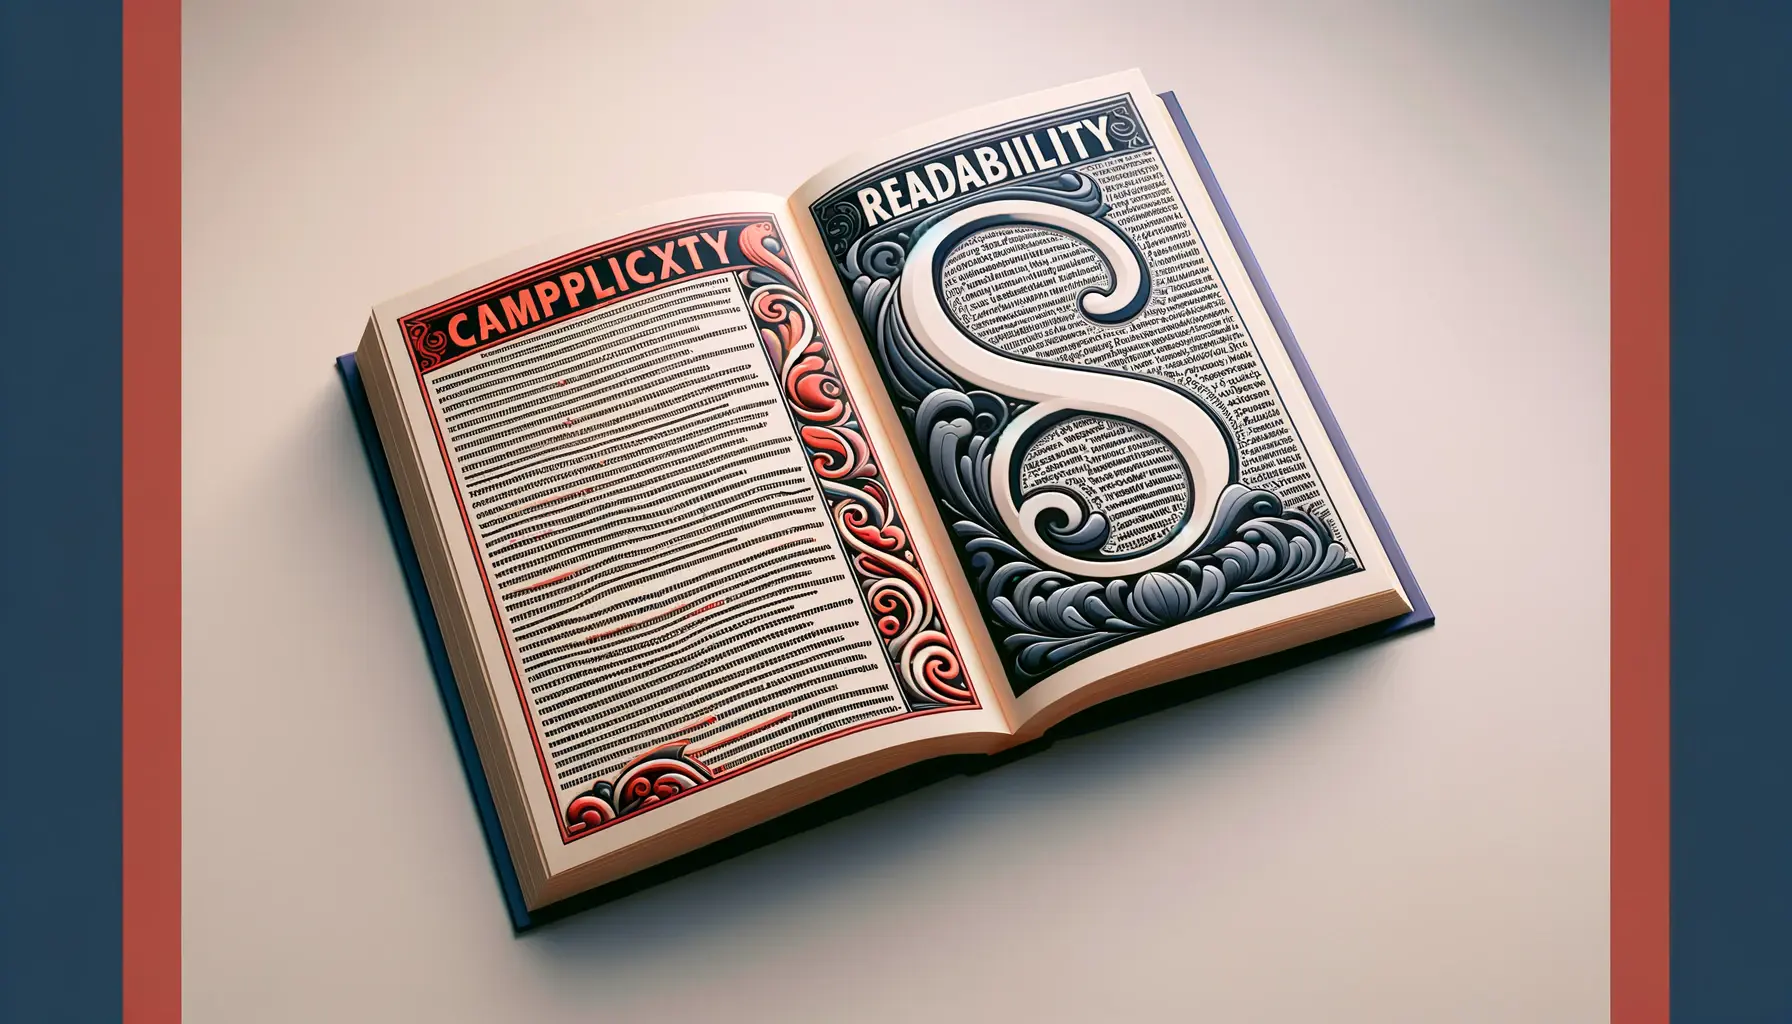 How to Balance Complexity and Readability in Typography